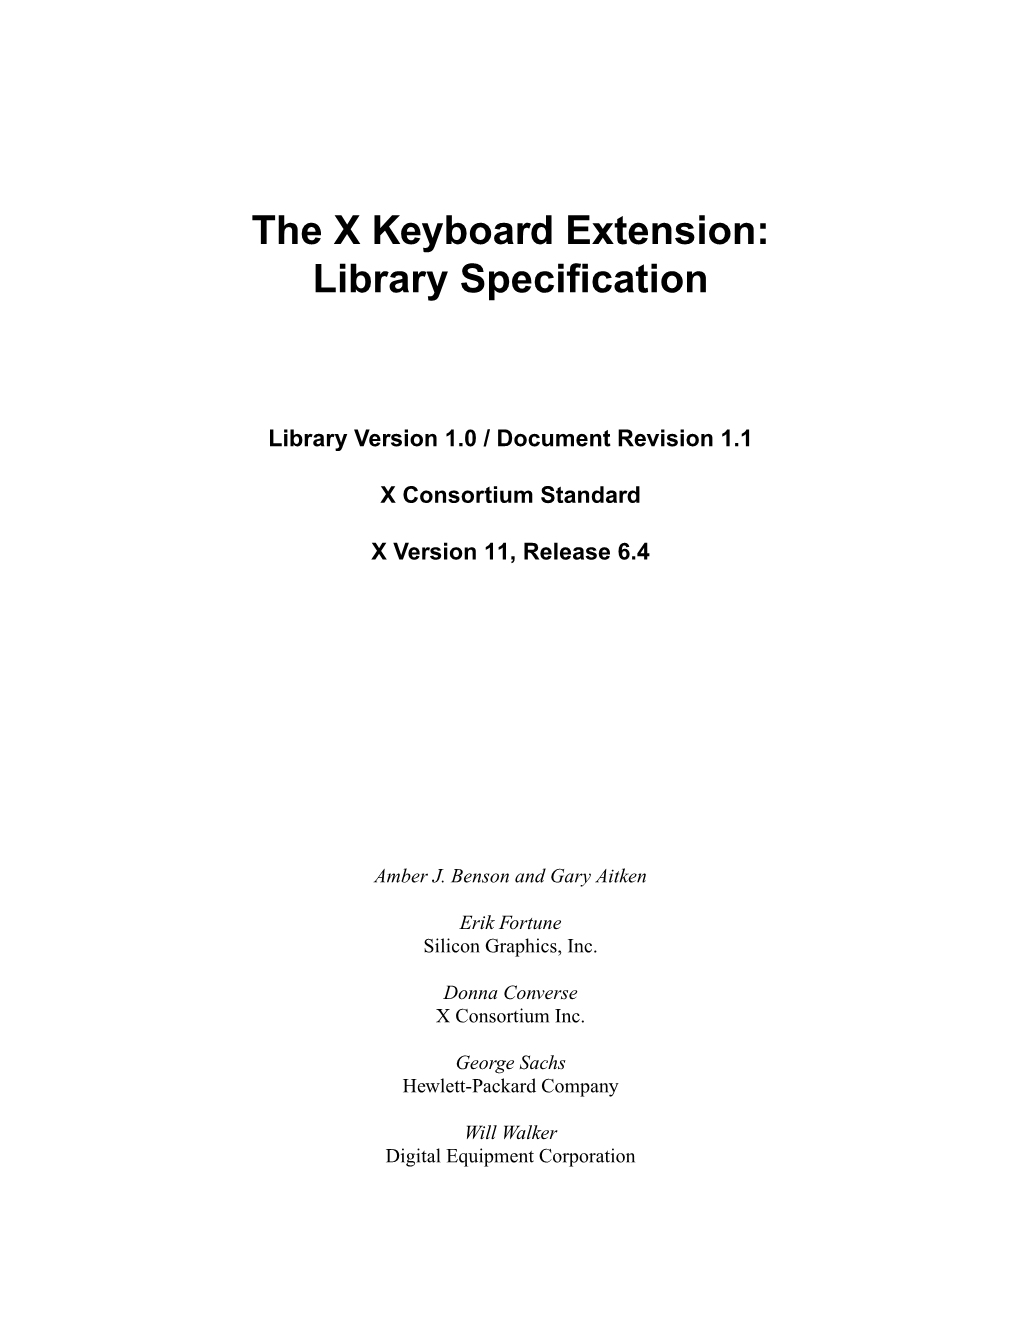 The X Keyboard Extension: Library Speciﬁcation